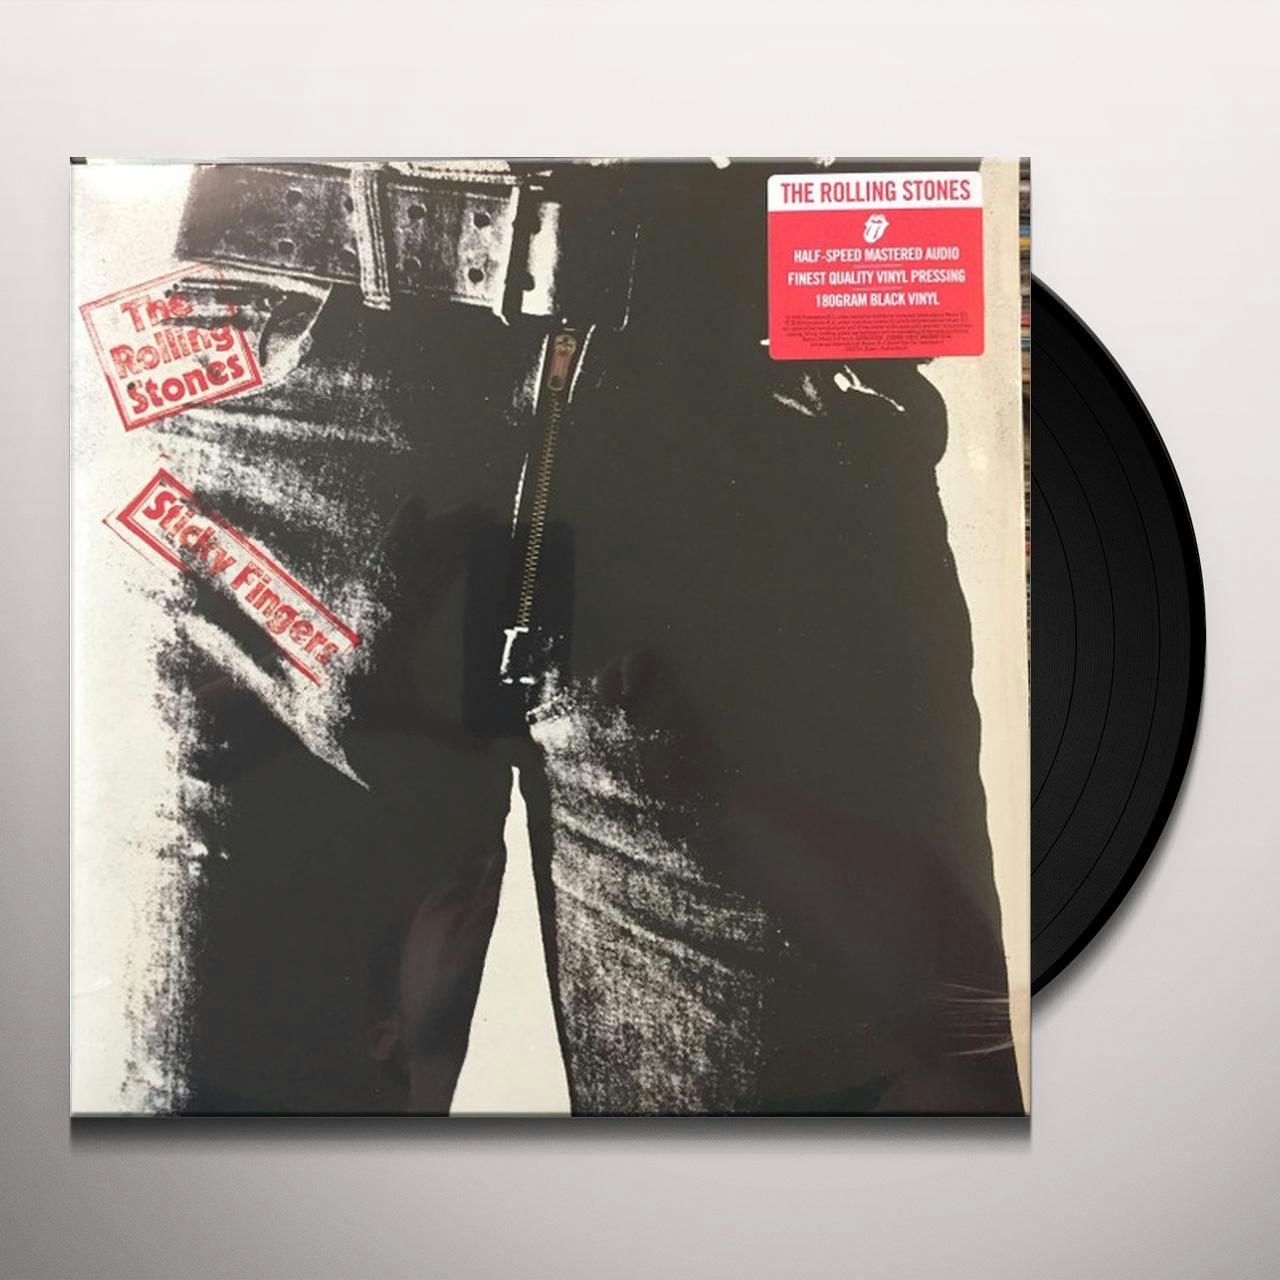 Greatest album photography: Sticky Fingers by the Rolling Stones